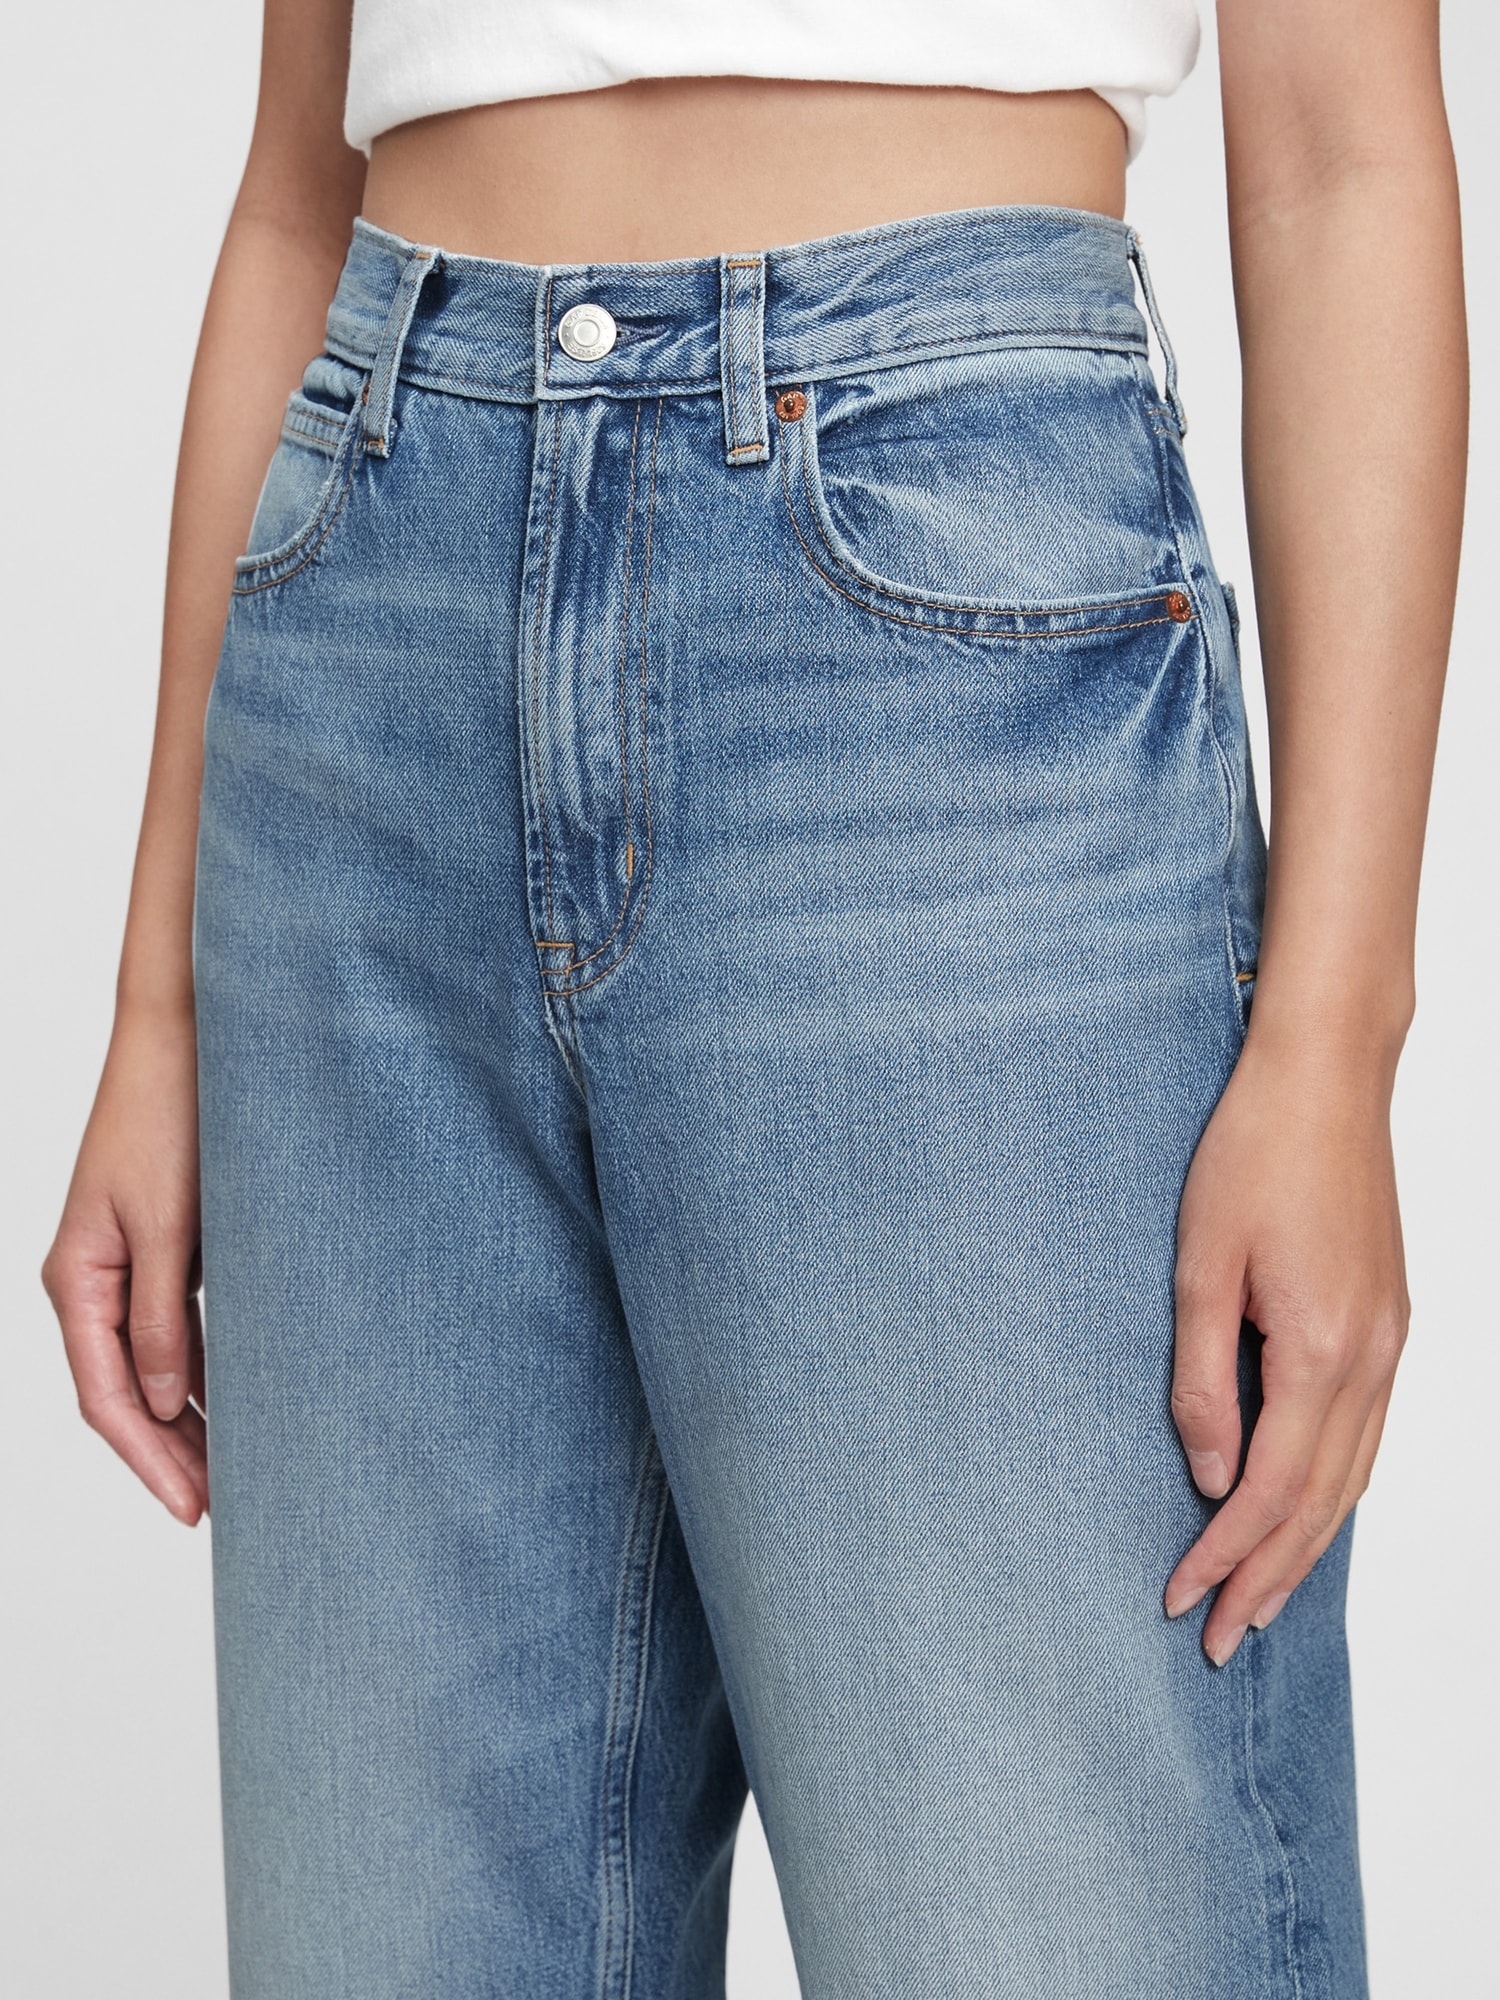 GAP, Jeans, Beand New High Rise Gap Barrel Jeans With Washwell